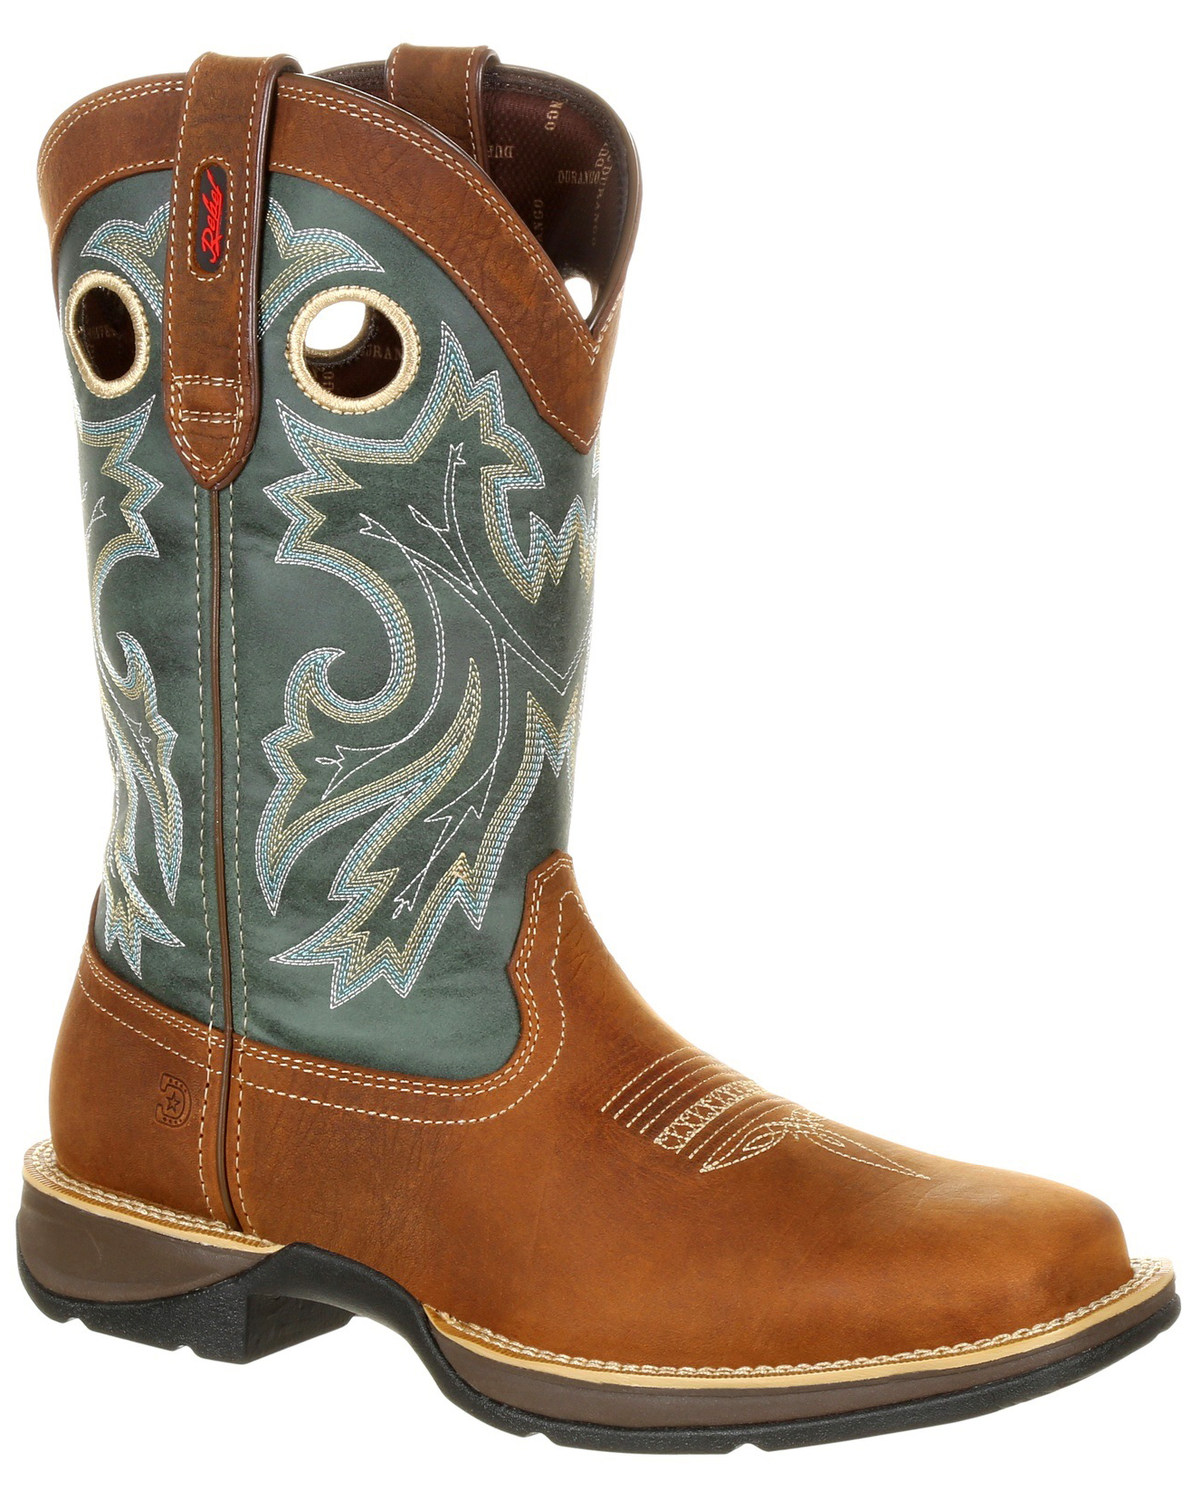 Durango Men's Rebel Pull On Western Boots - Broad Square Toe